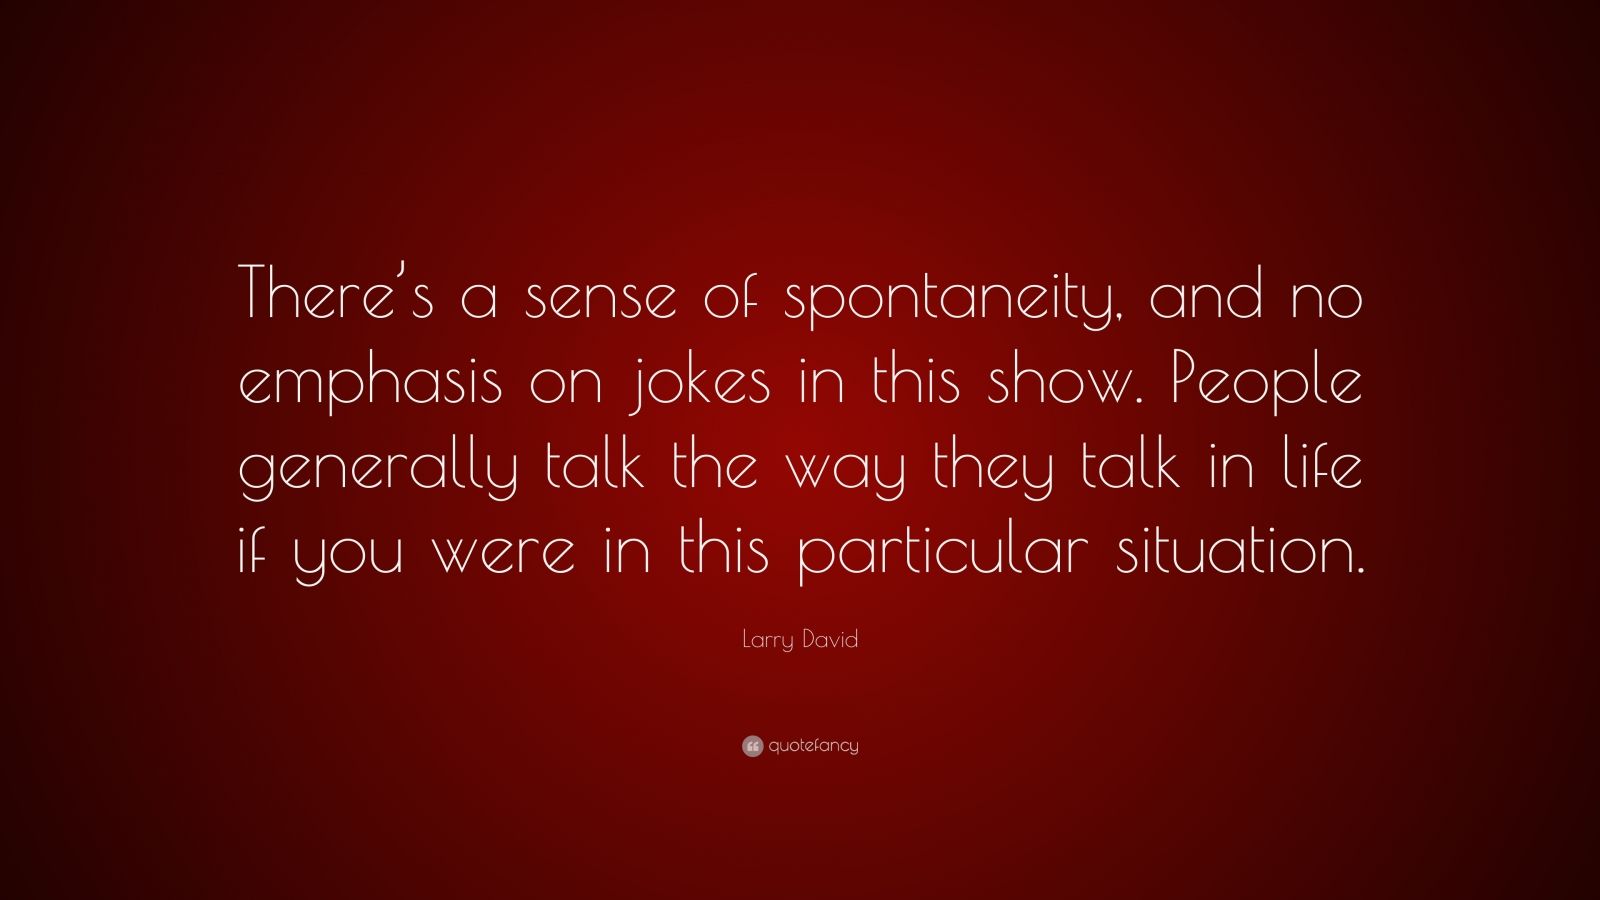 Larry David Quote: “There’s a sense of spontaneity, and no emphasis on ...